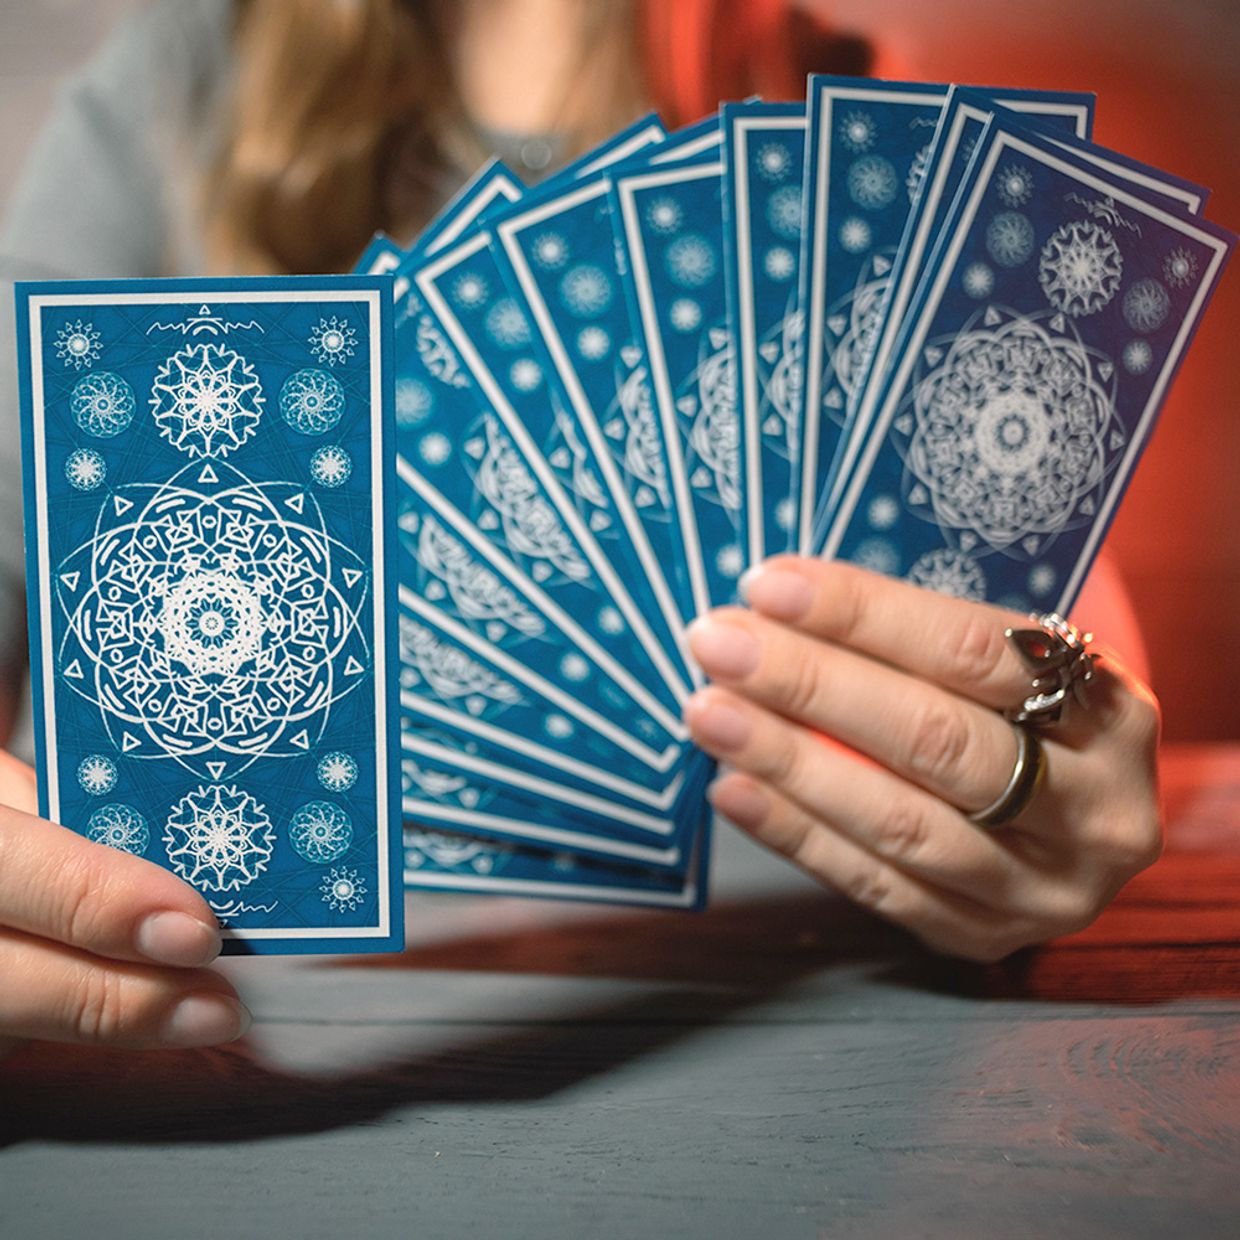 Should You Read Your Own Tarot Cards?